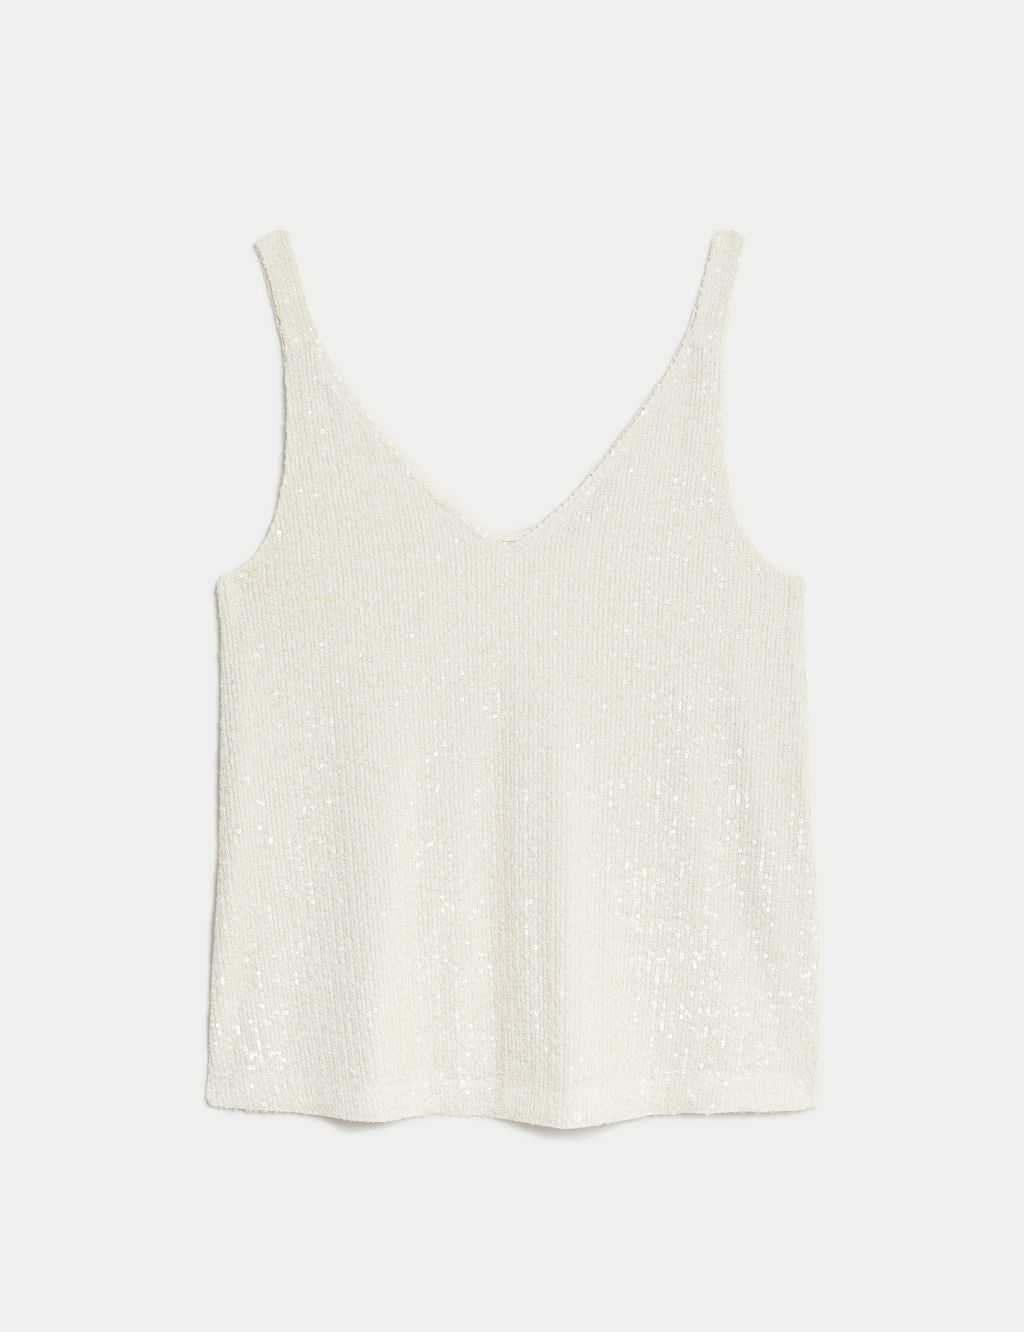 Sequin V-Neck Cami Top | M&S Collection | M&S